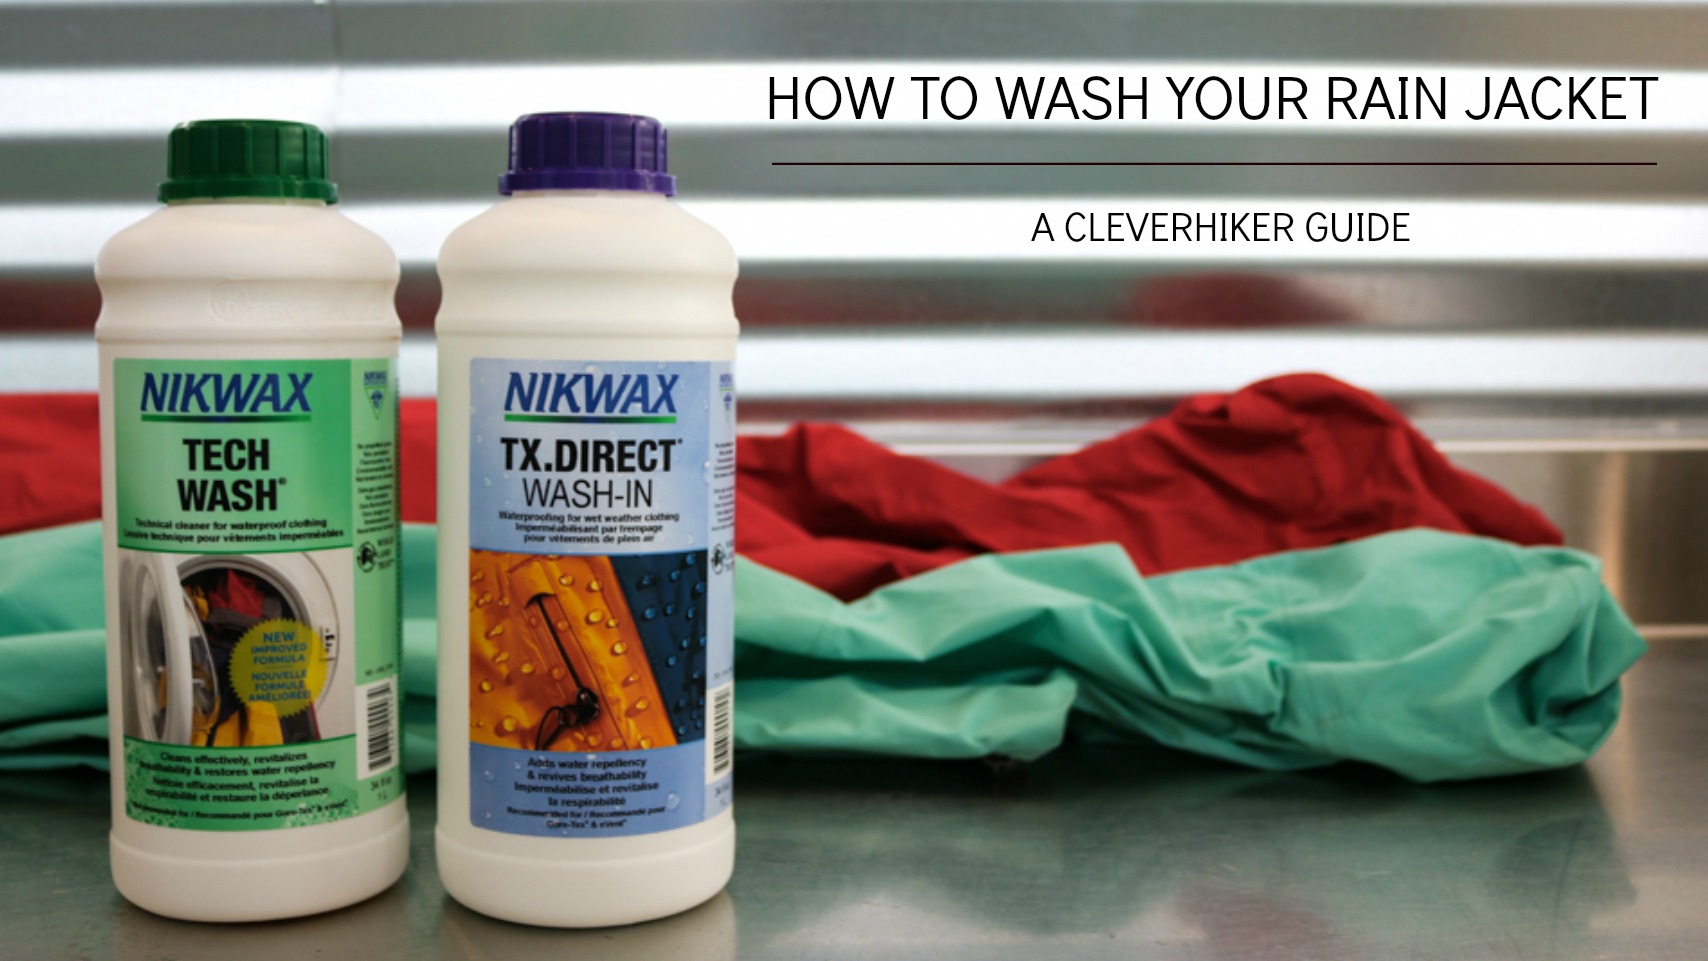 How to Wash In Waterproofing With Nikwax